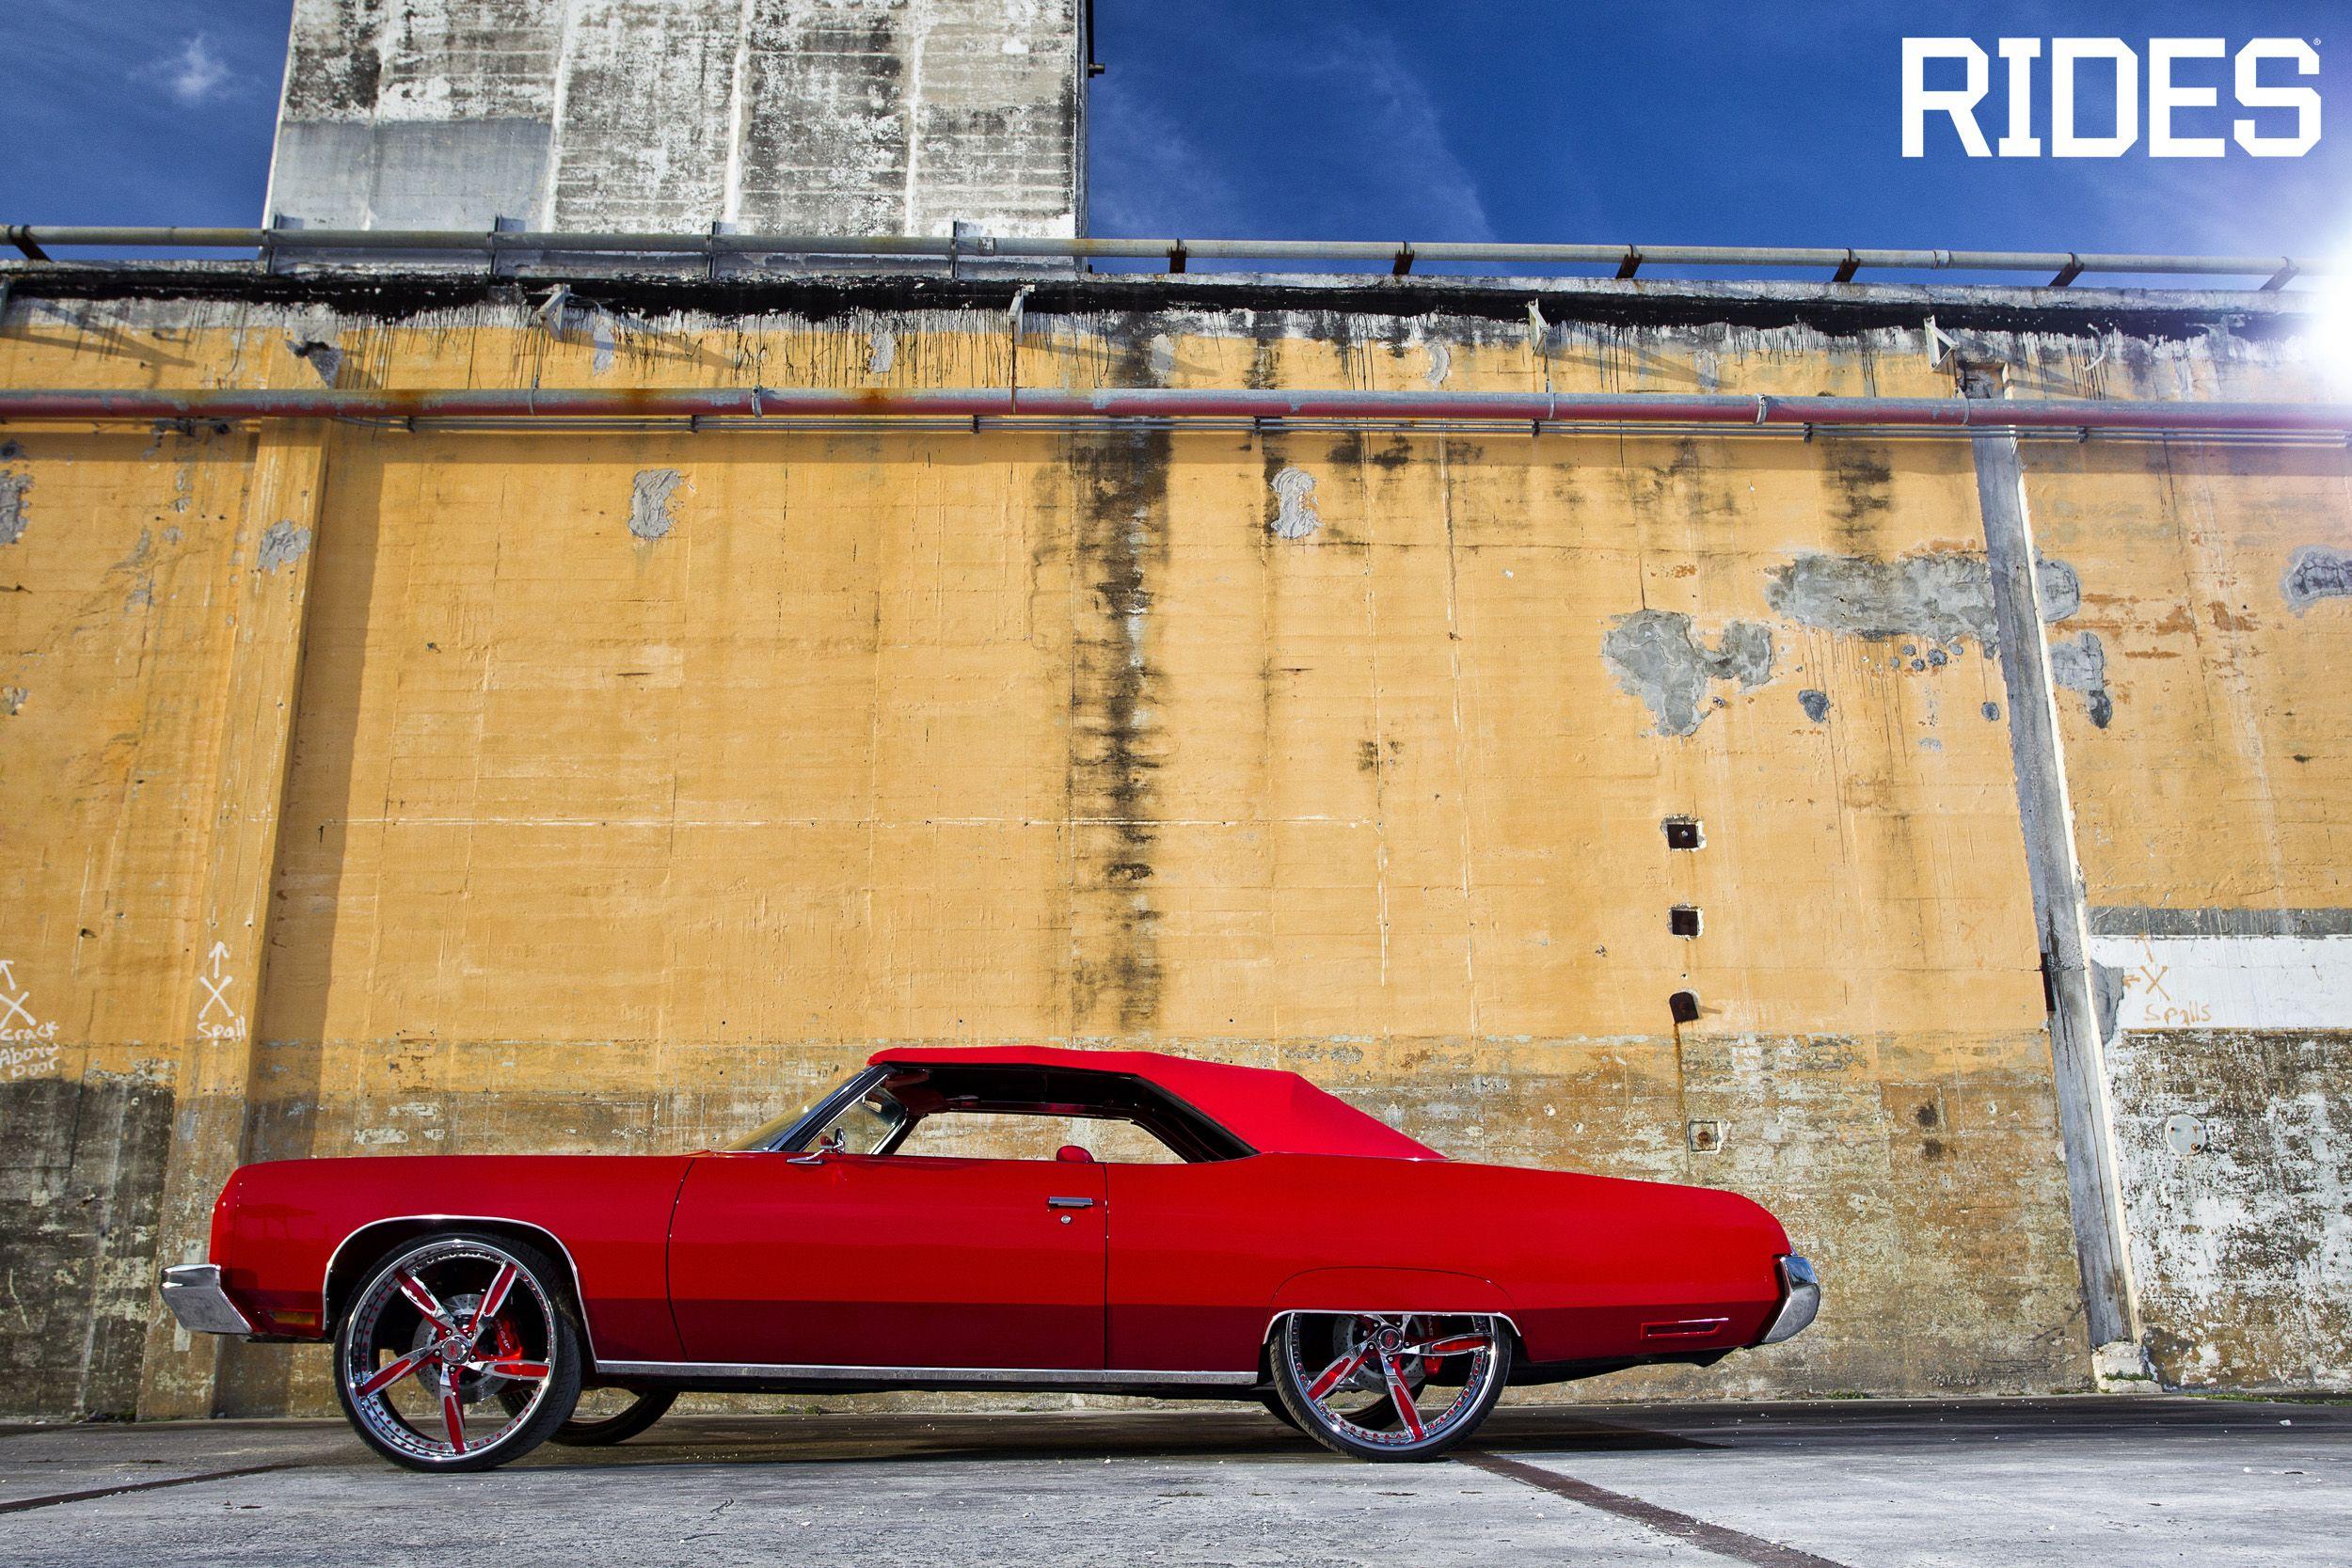 Rick Ross's Luxury Donk Is Now Your Wallpaper